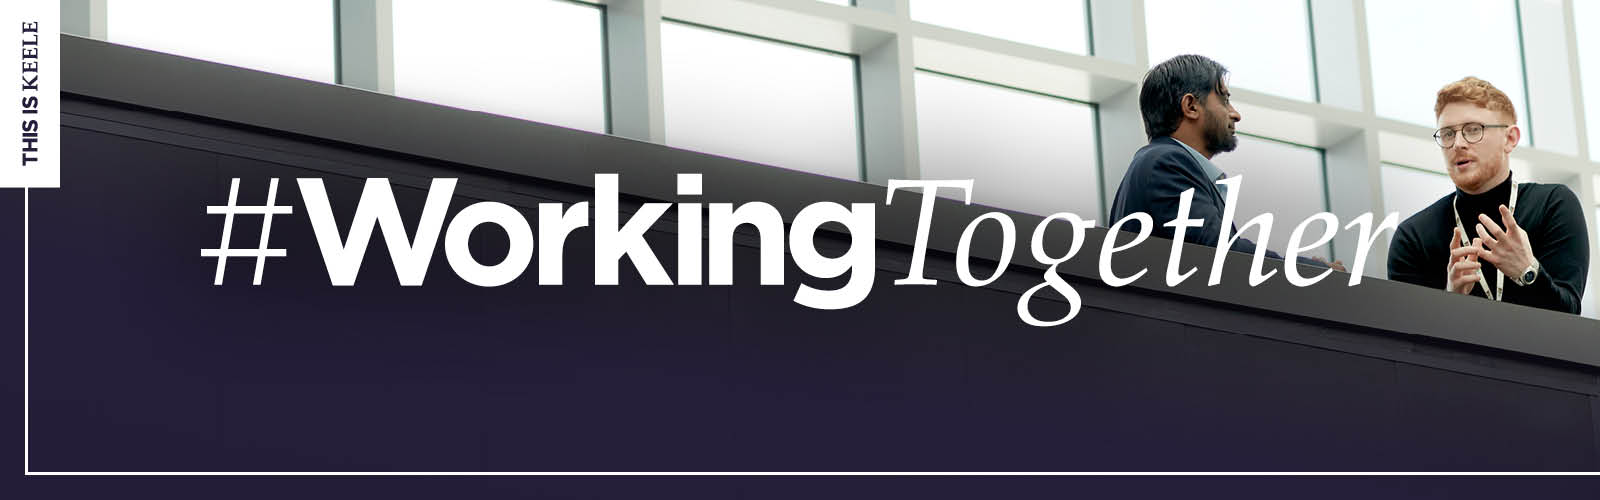 Working together banner 